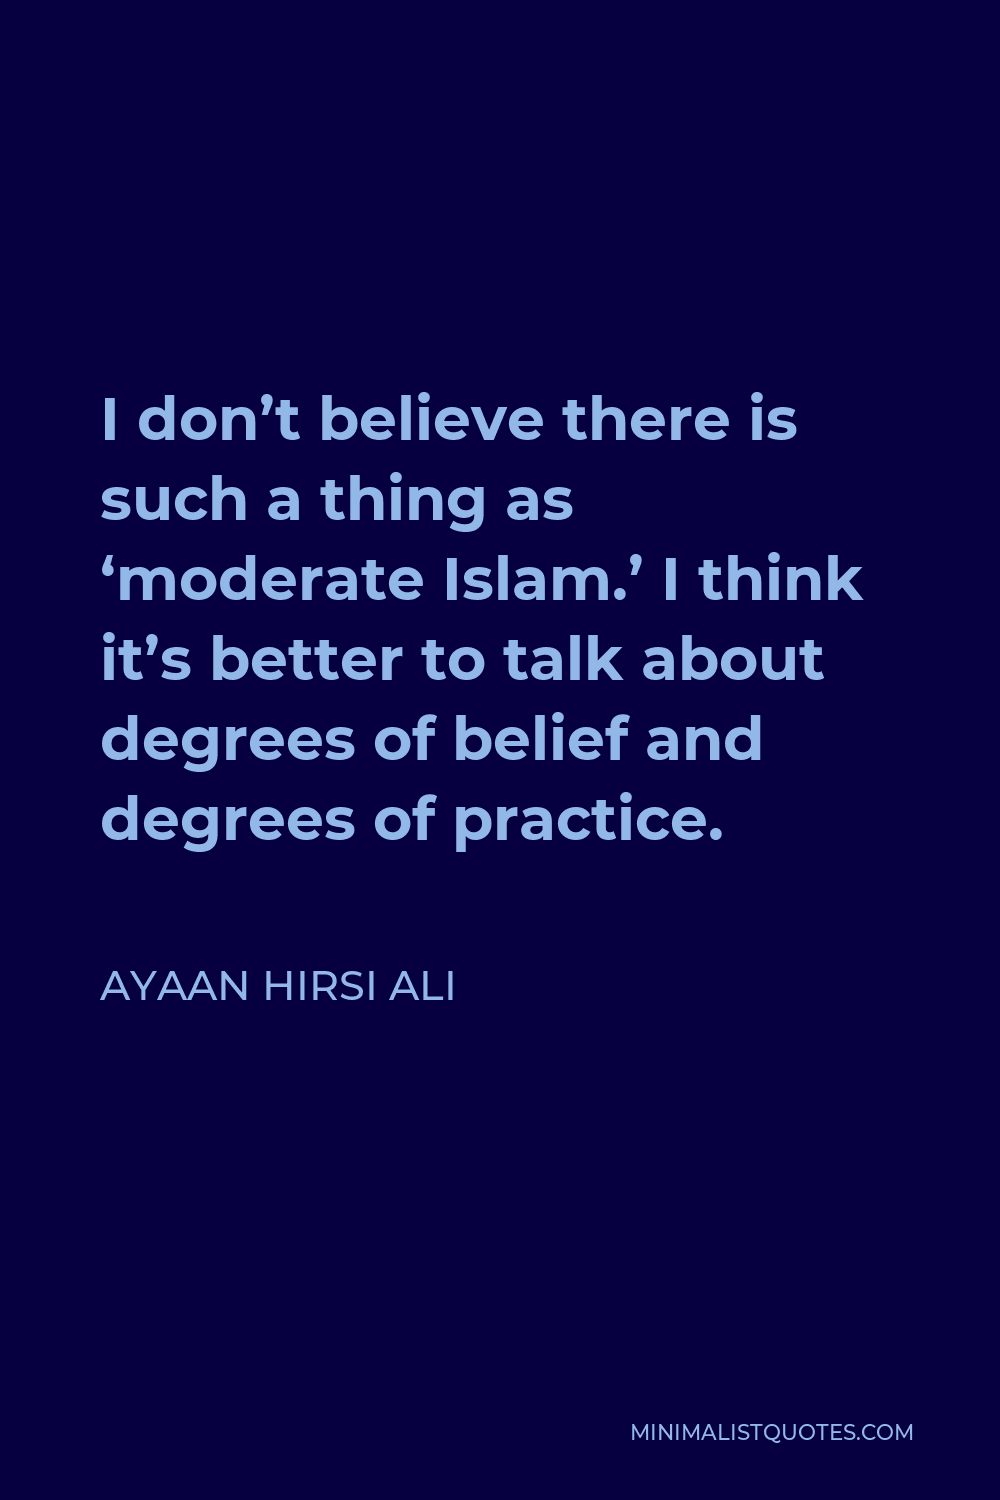 Ayaan Hirsi Ali Quote - I don’t believe there is such a thing as ‘moderate Islam.’ I think it’s better to talk about degrees of belief and degrees of practice.